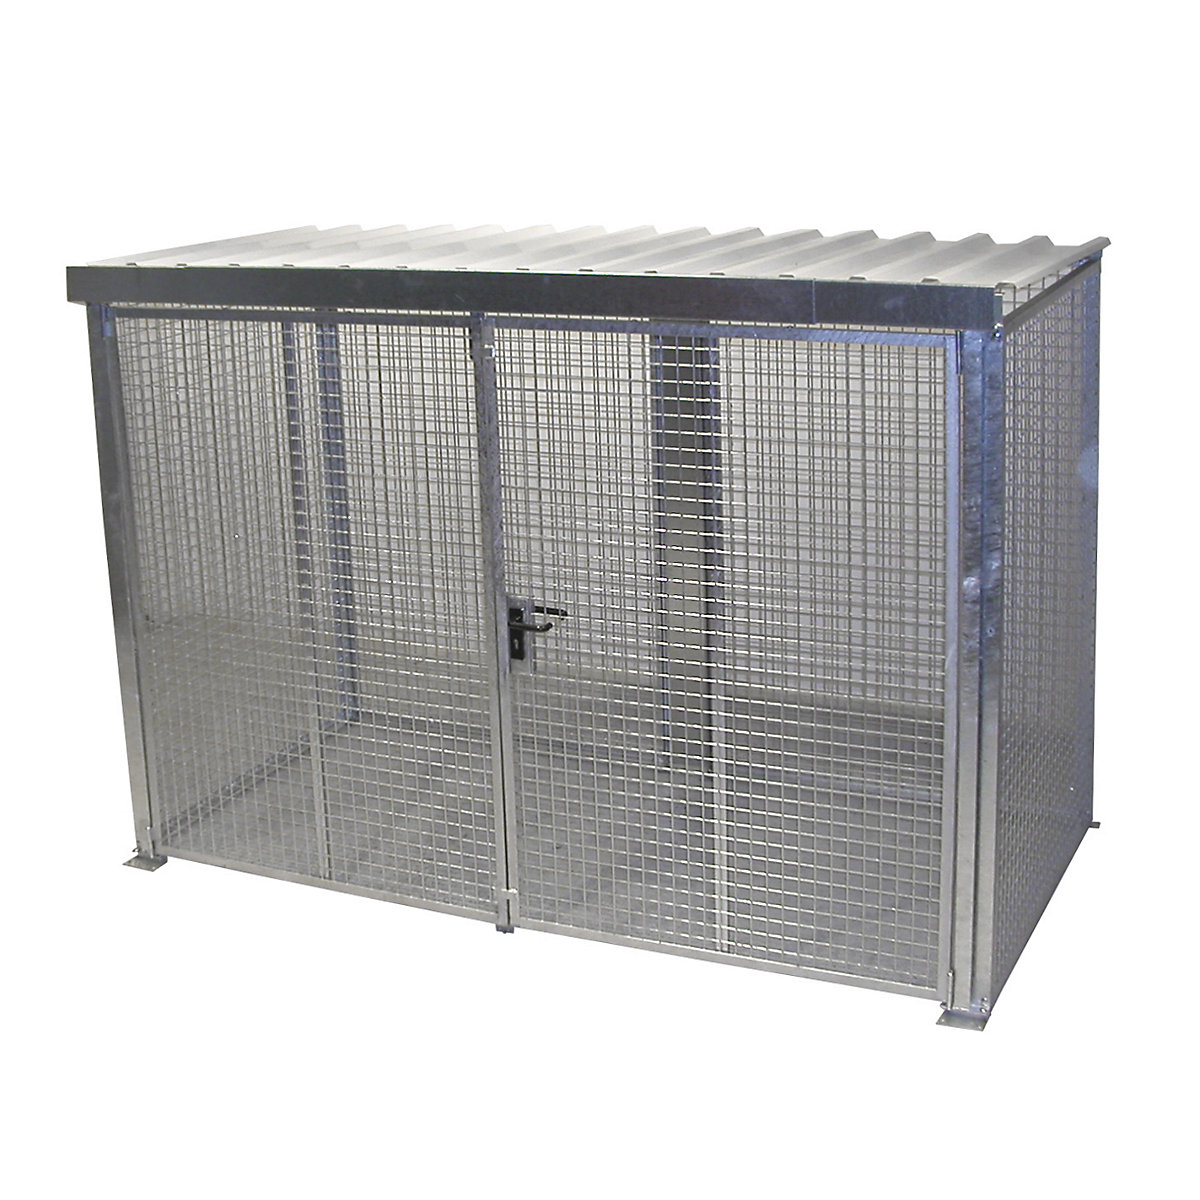 EUROKRAFTpro – Mesh gas cylinder cage, with roof and double hinged doors, WxD 3100 x 1500 mm